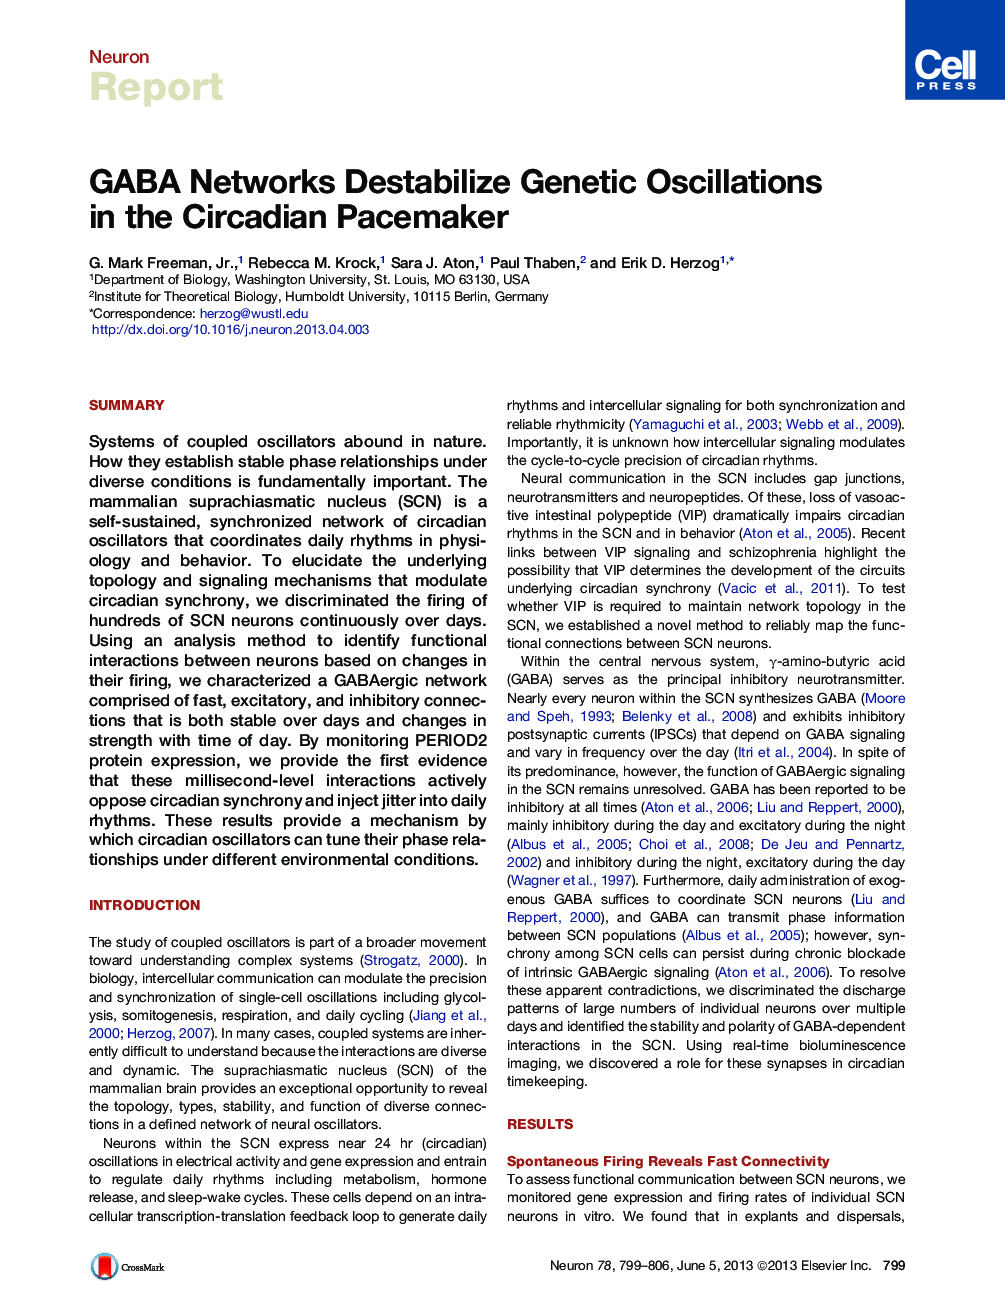 GABA Networks Destabilize Genetic Oscillations in the Circadian Pacemaker